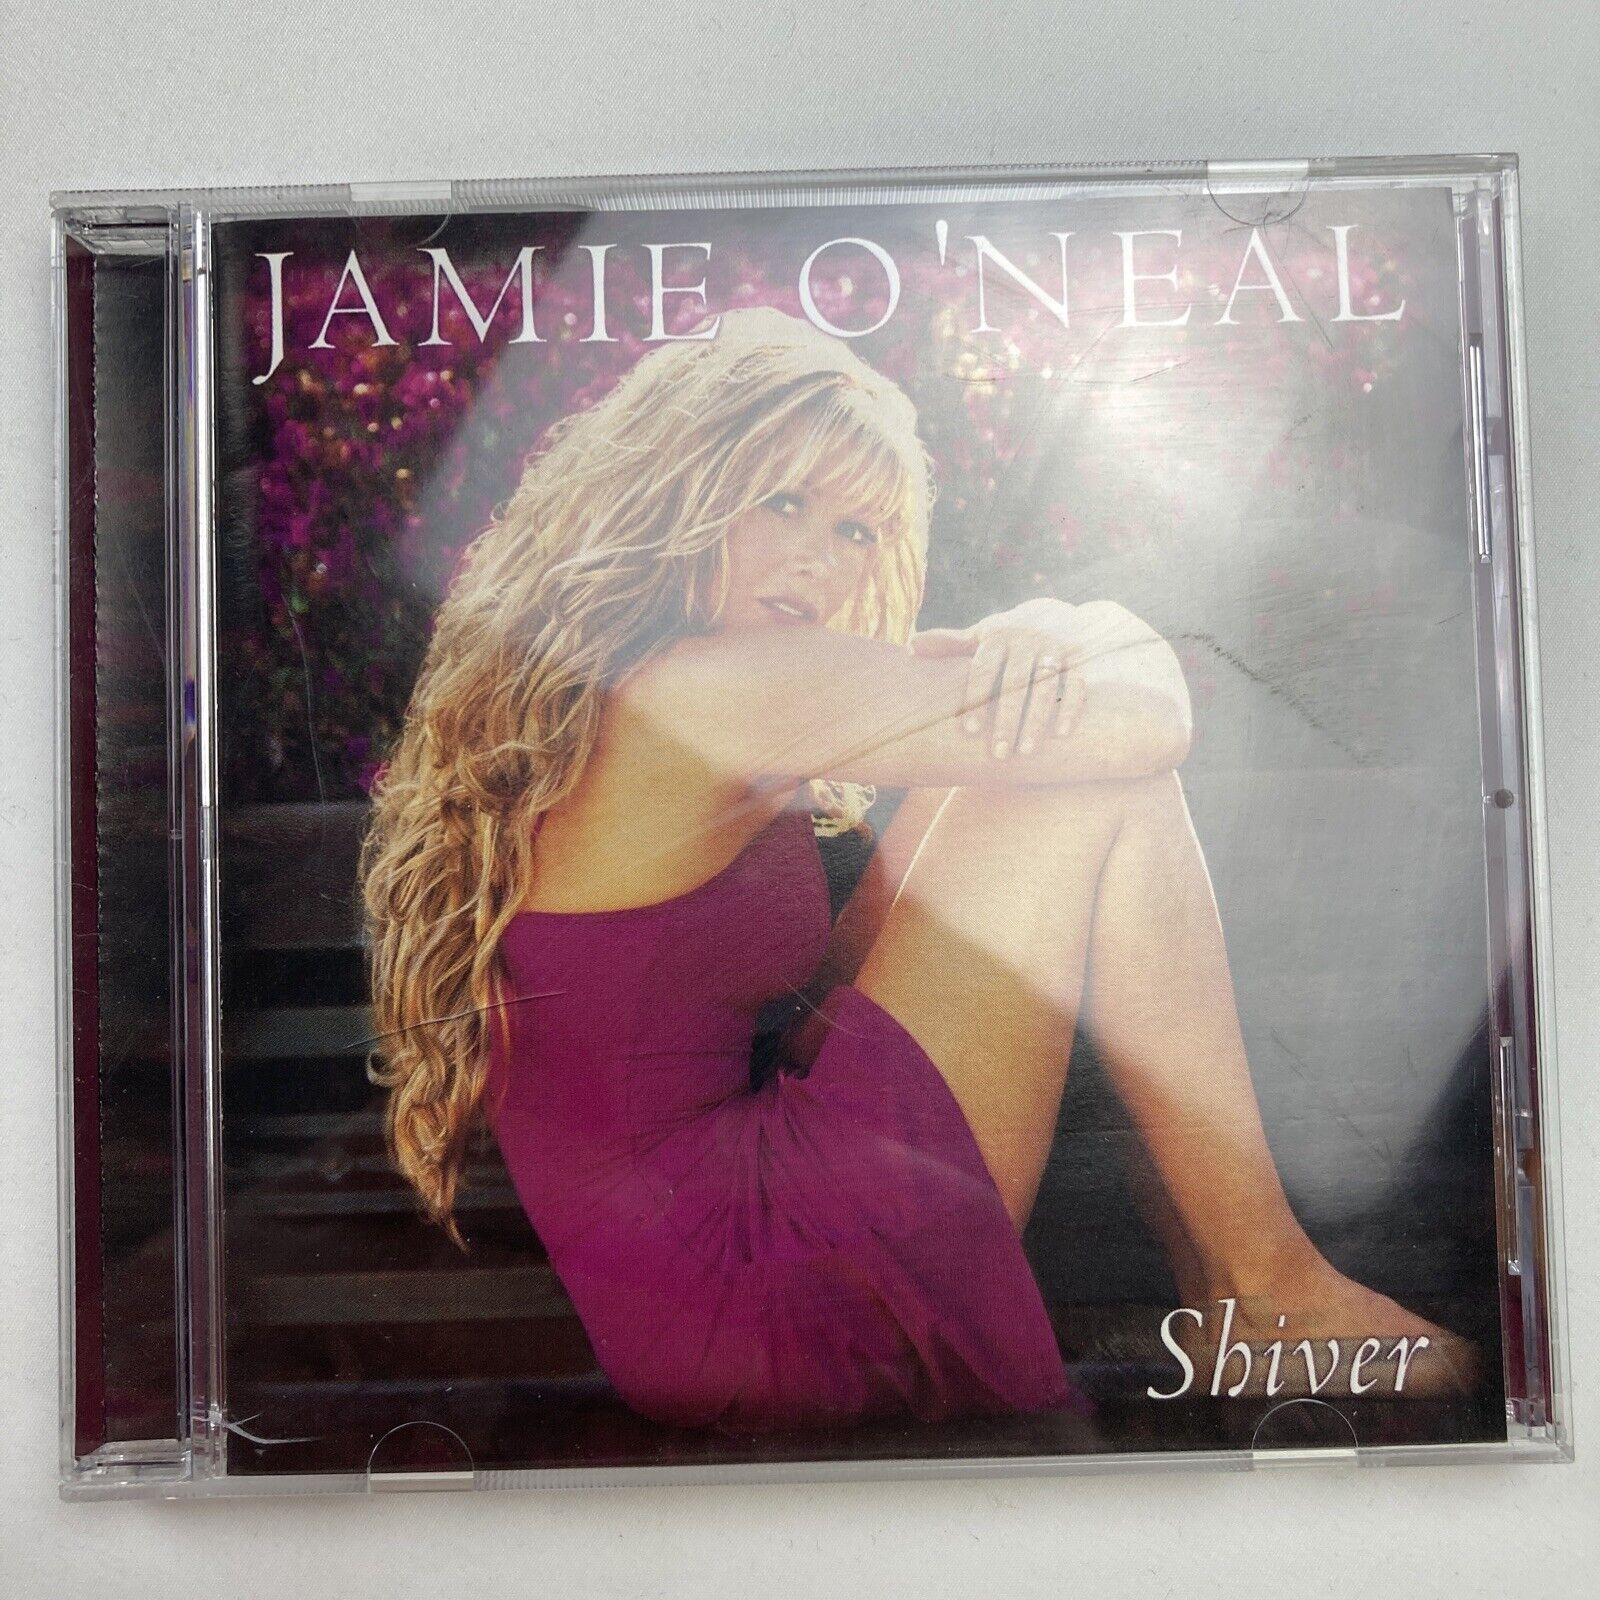 Shiver by Jamie O'Neal (Country) (CD, Oct-2000, Mercury Nashville)